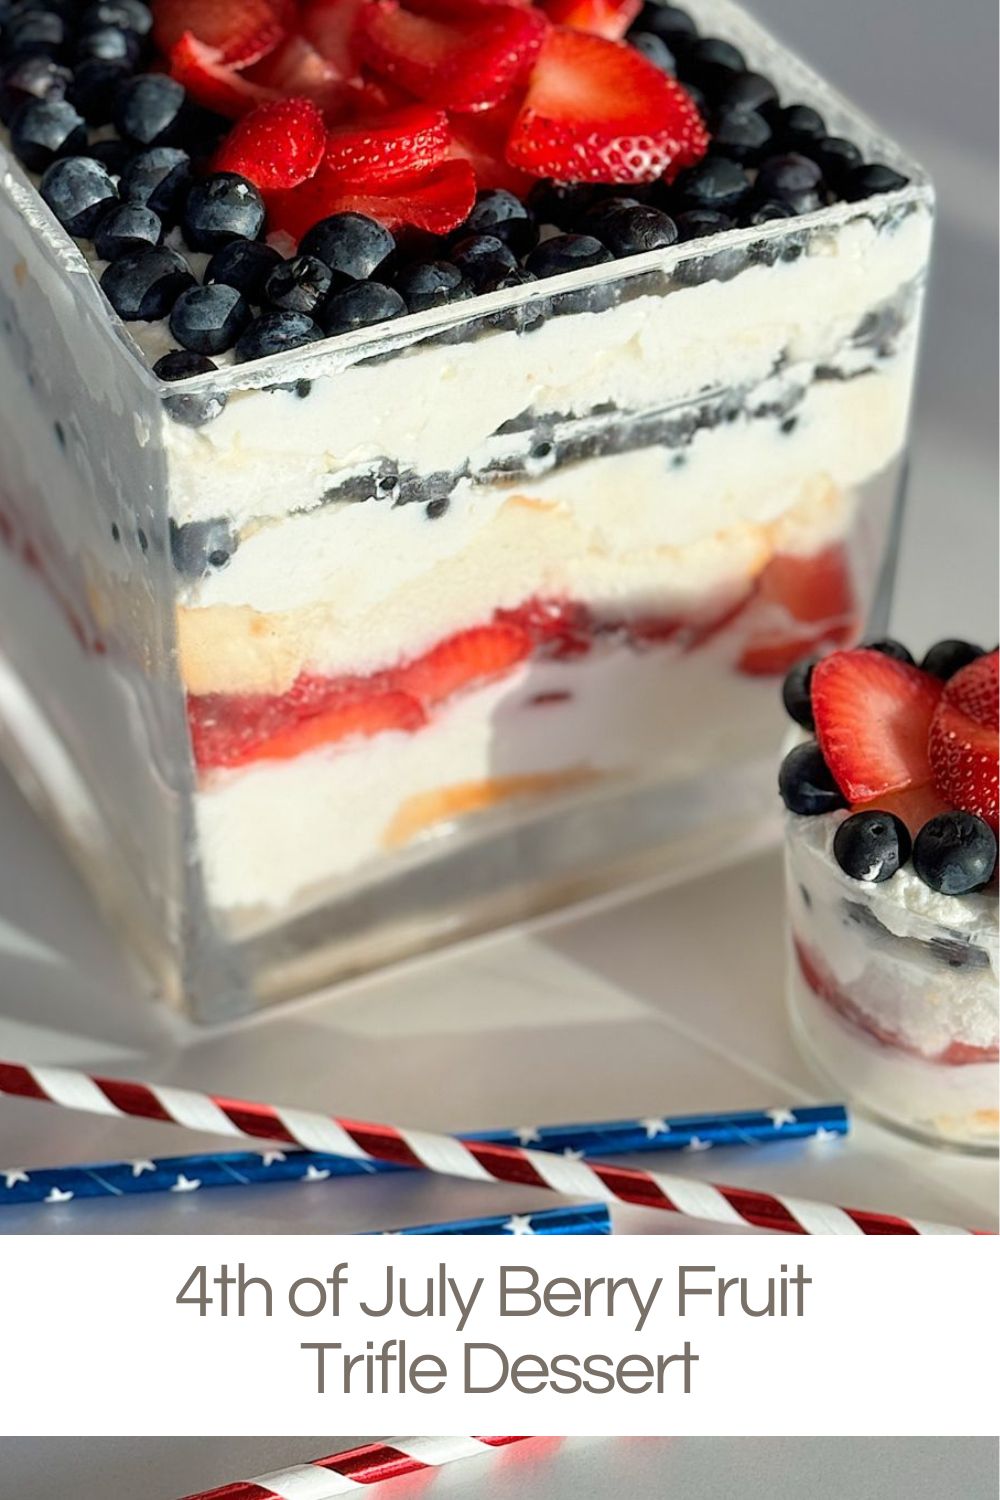 The 4th of July is a time for celebration, and what better way to commemorate Independence Day than with a patriotic berry fruit trifle dessert? 